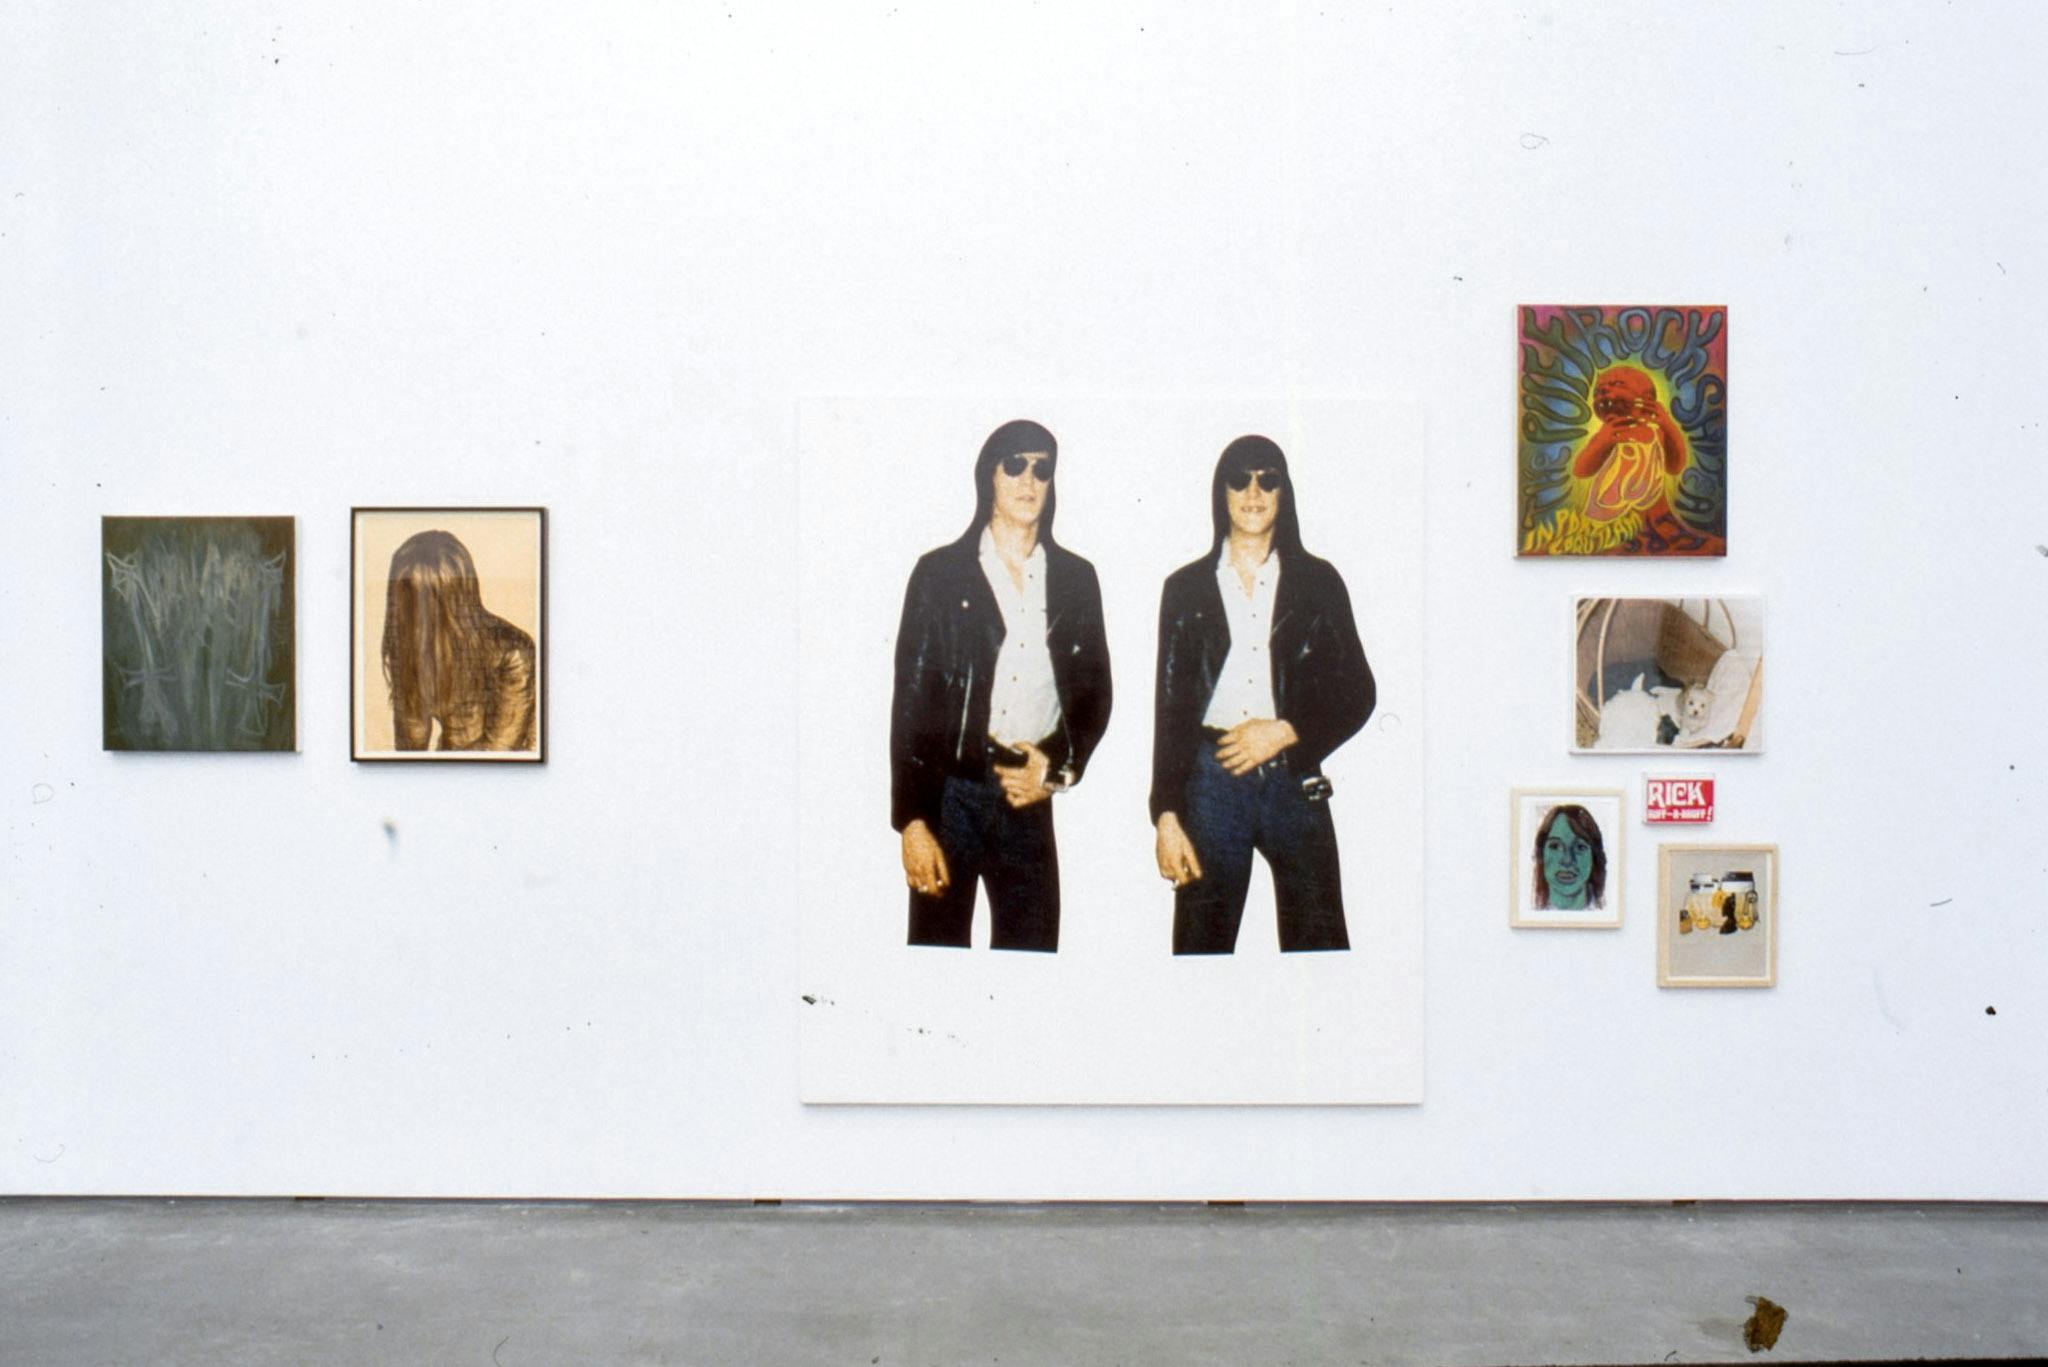 Installation image of works by Steven Shearer. Paintings, collage works, and photographs are mounted on the wall. Many of them are coloured. Some works show figures of a person with long straight hair. 